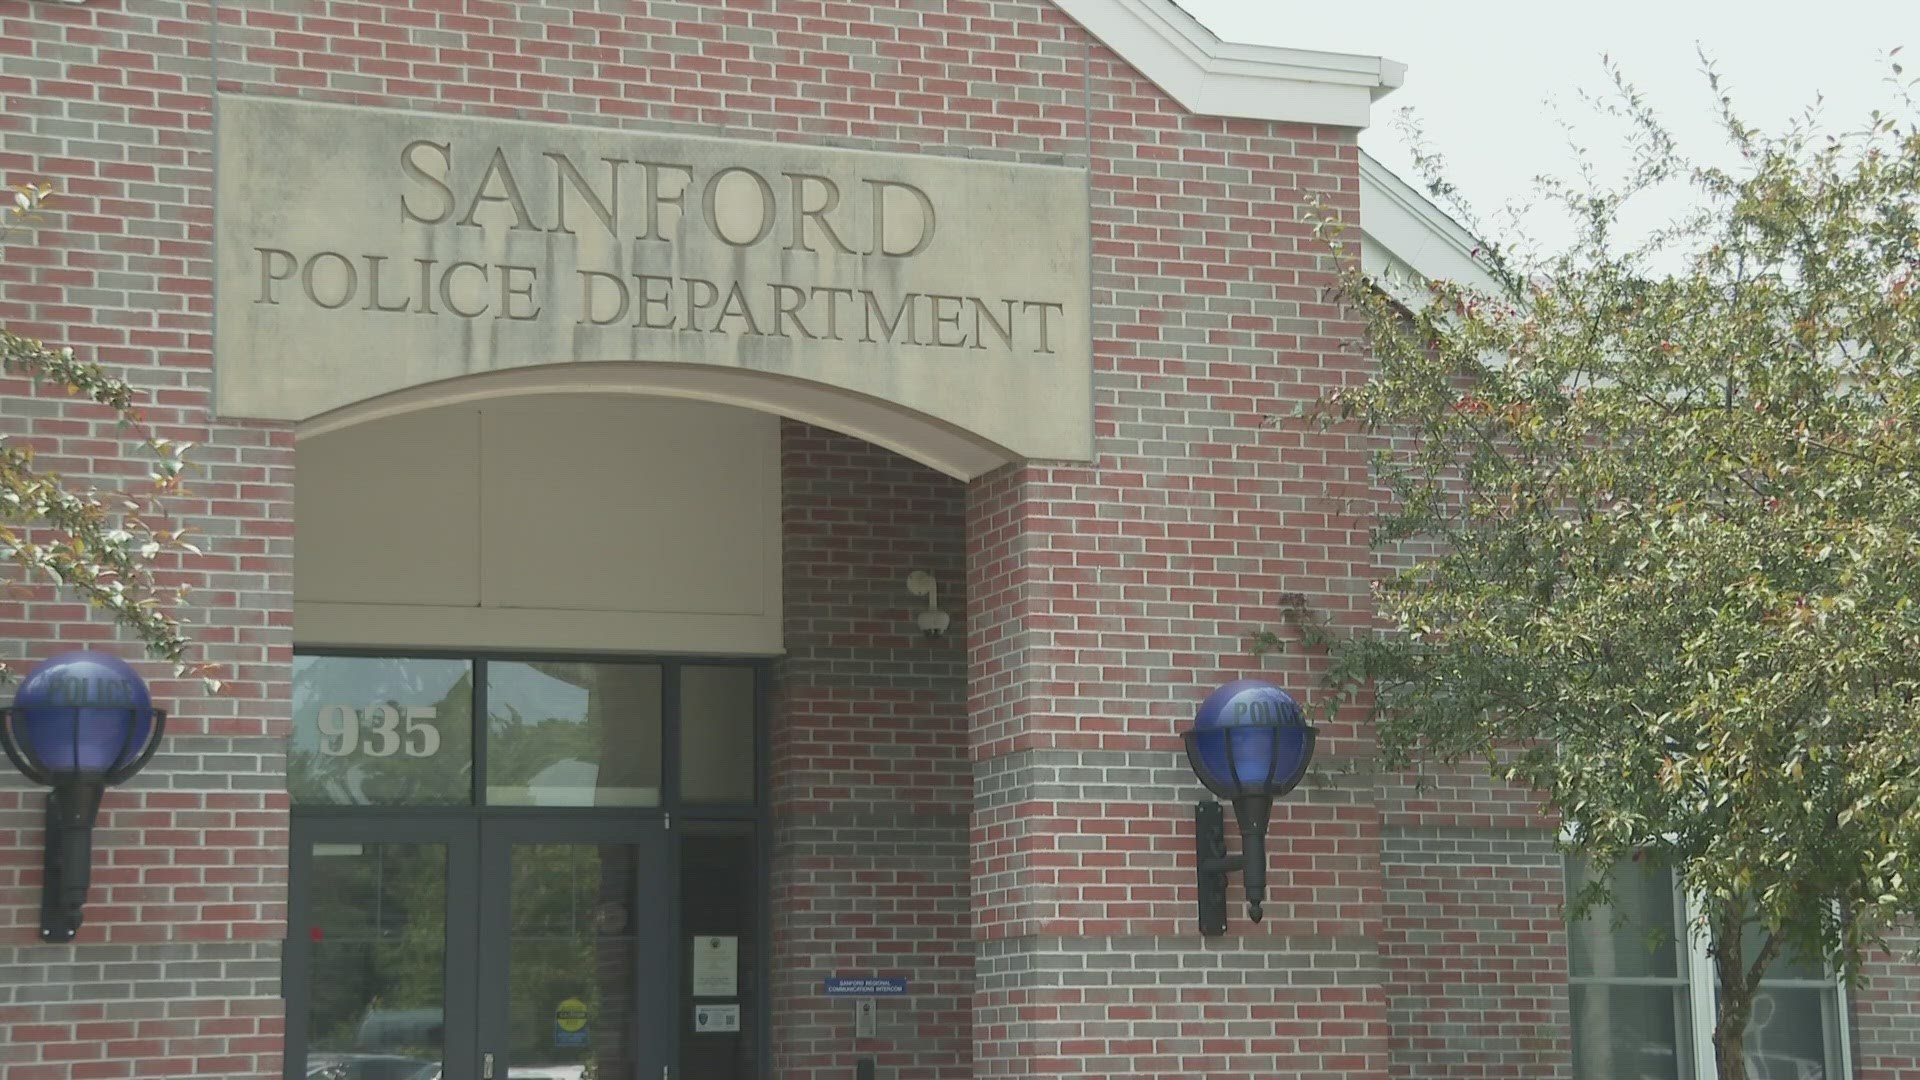 The town of Sanford has witnessed three overdoses within a mere 24-hour span, according to reports last week from its police department.